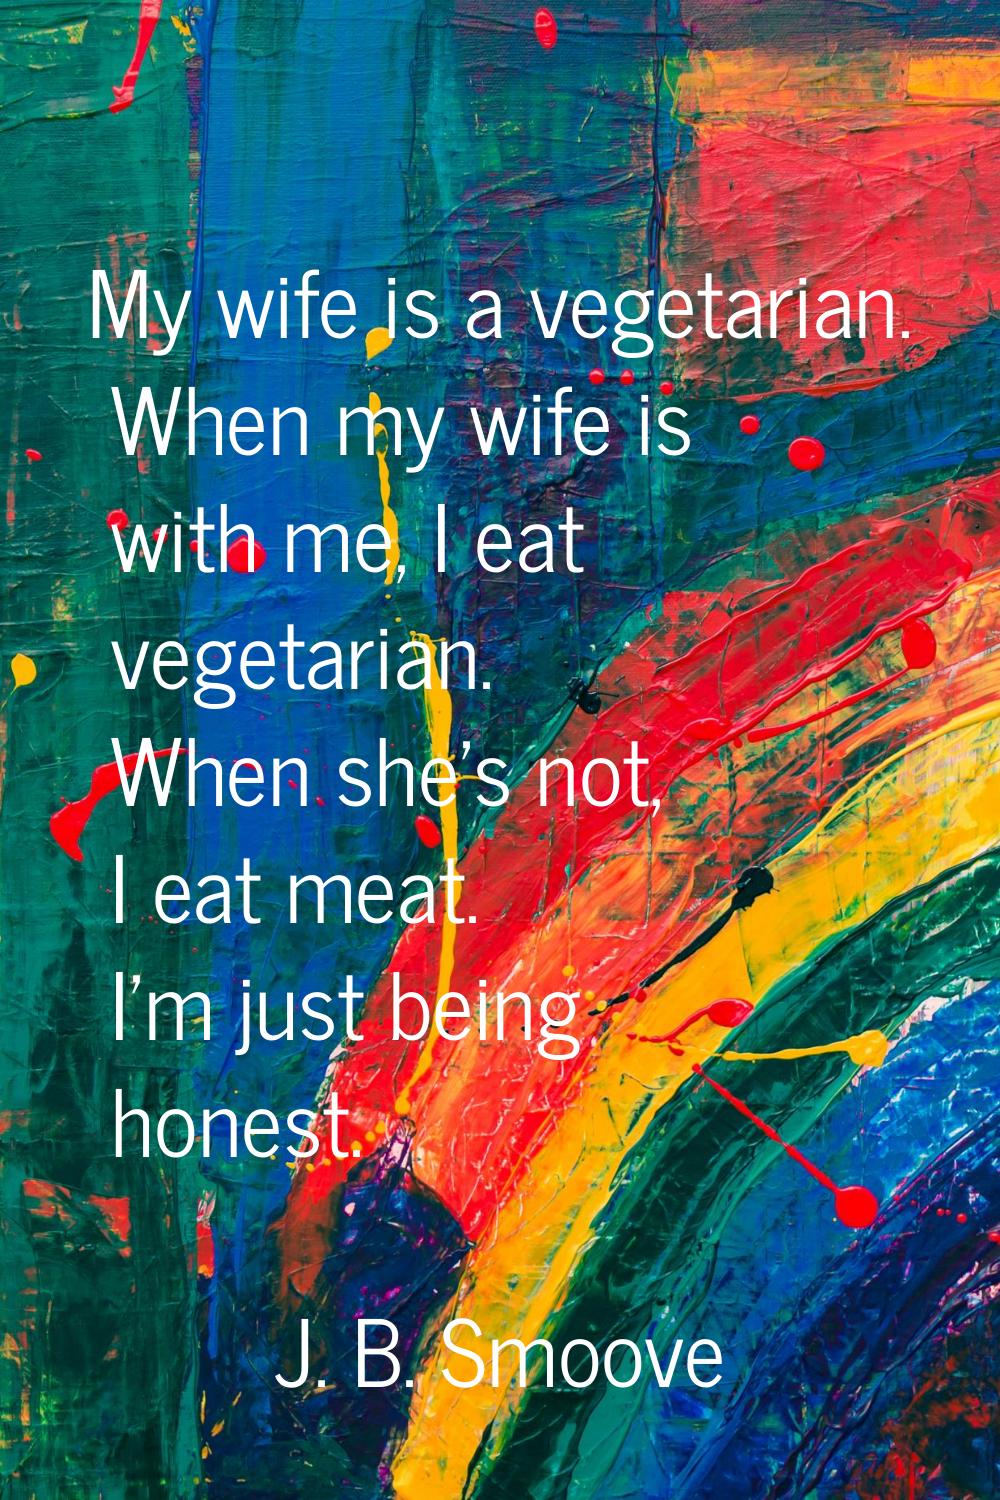 My wife is a vegetarian. When my wife is with me, I eat vegetarian. When she's not, I eat meat. I'm